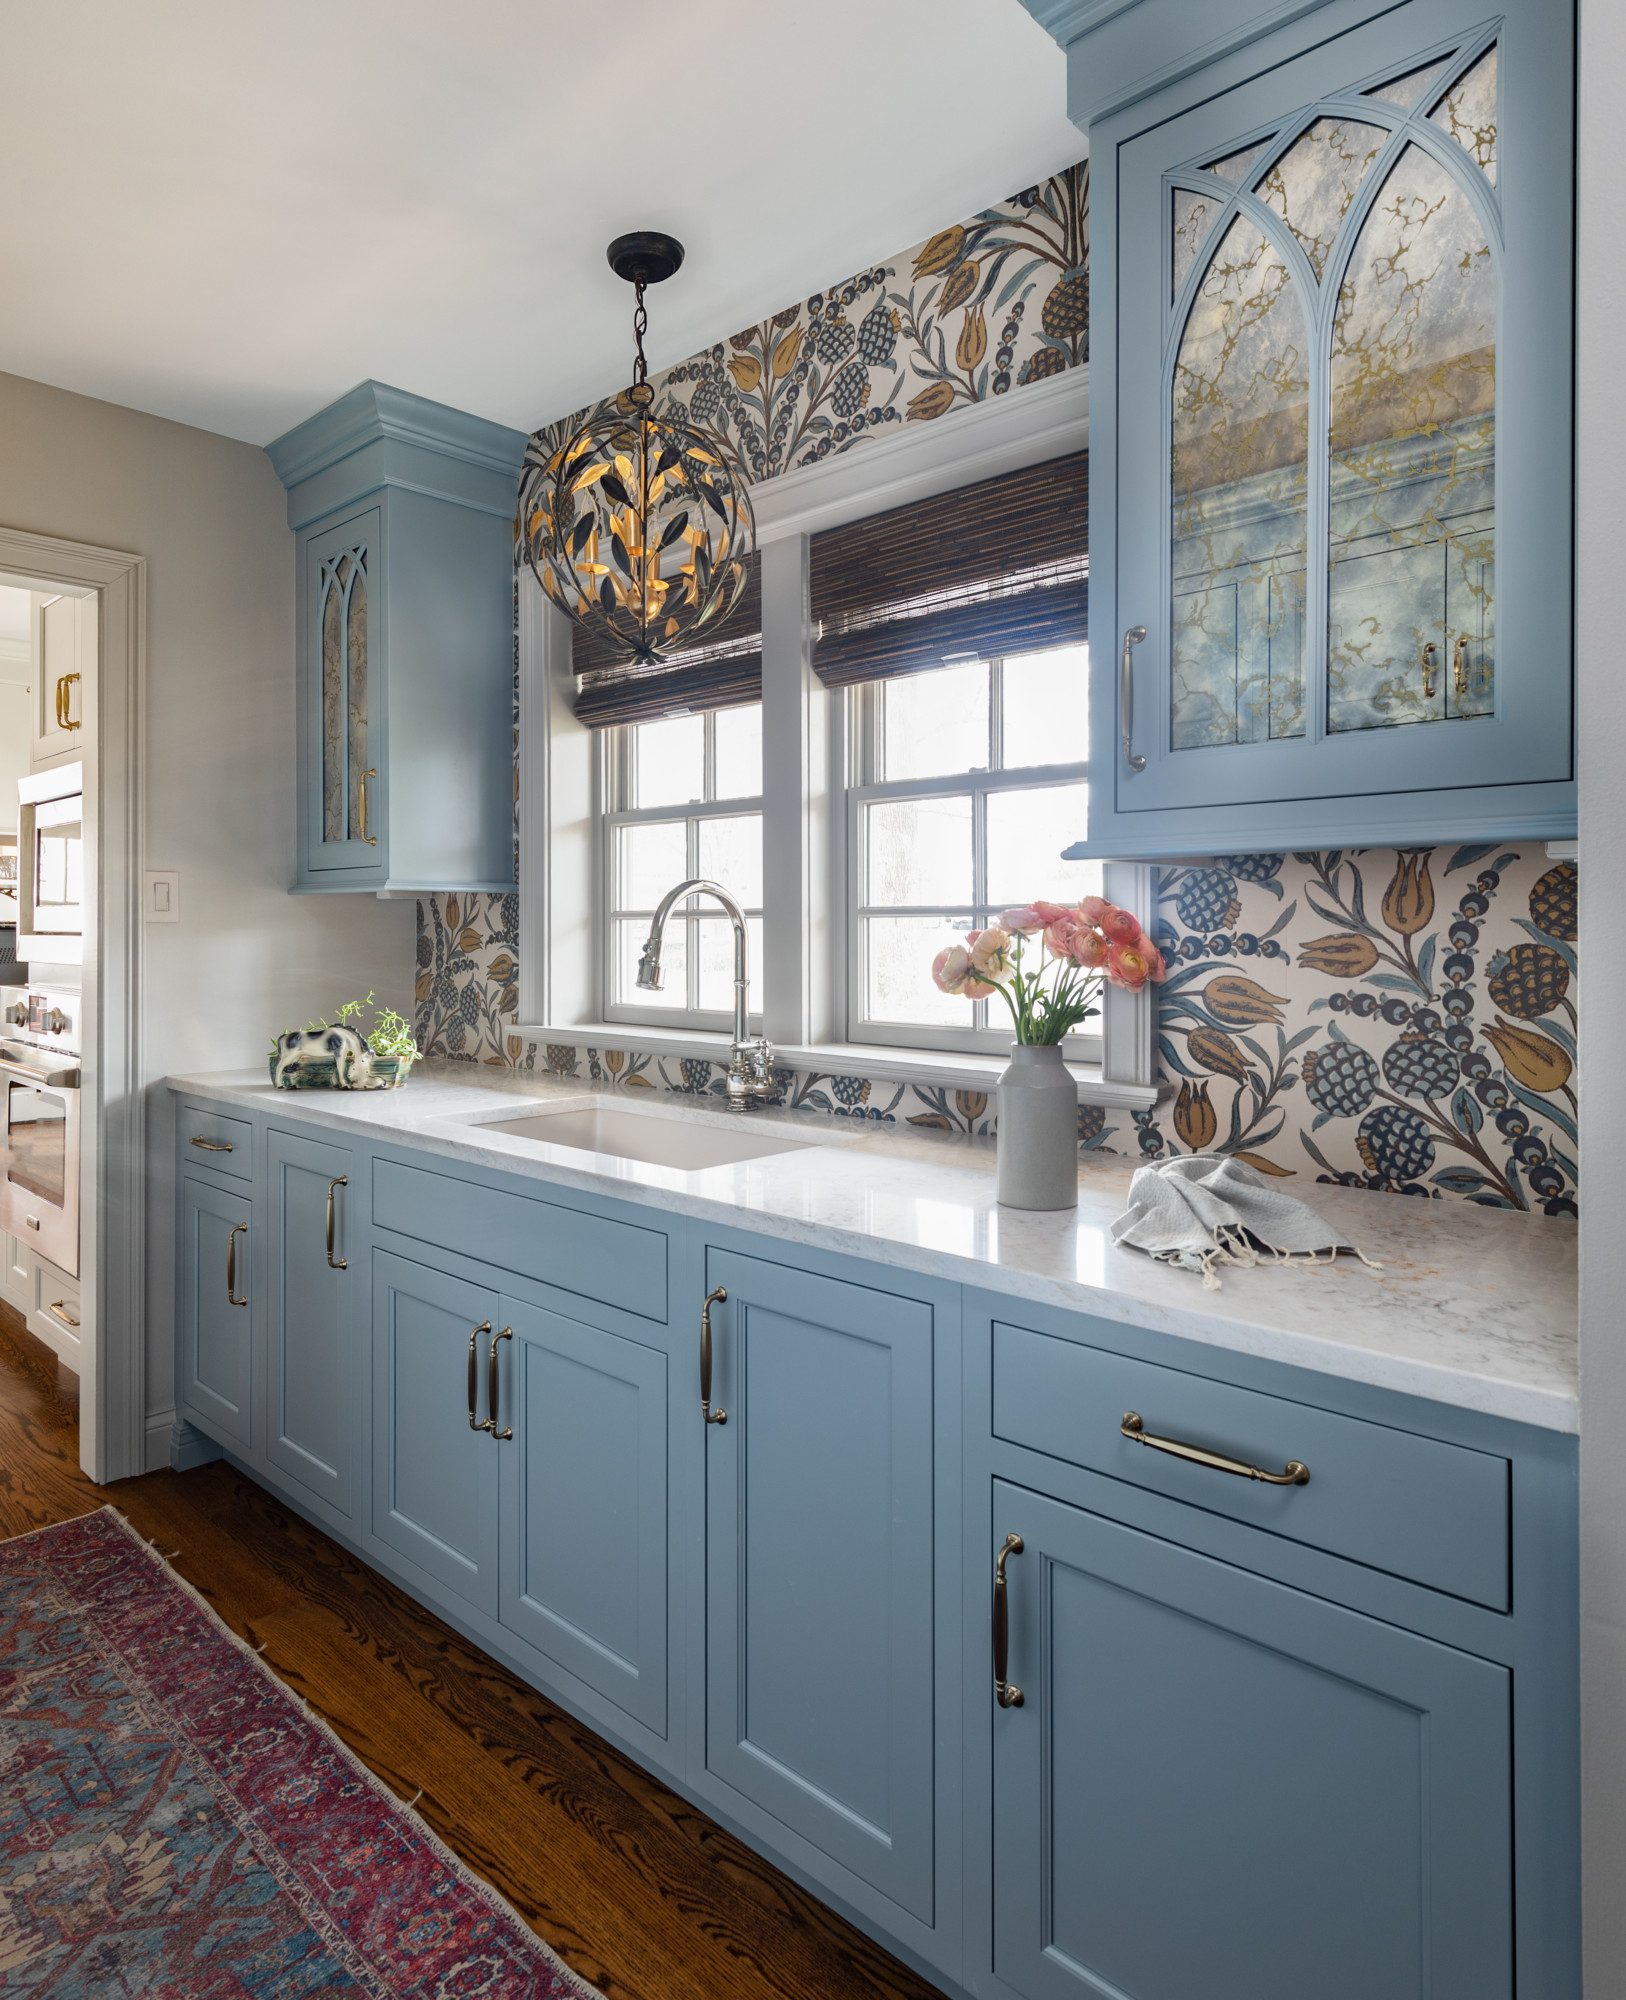 Kitchen cabinets are blue and the walls are patterned with intricate wallpaper and a gorgeous light fixture above the sink.